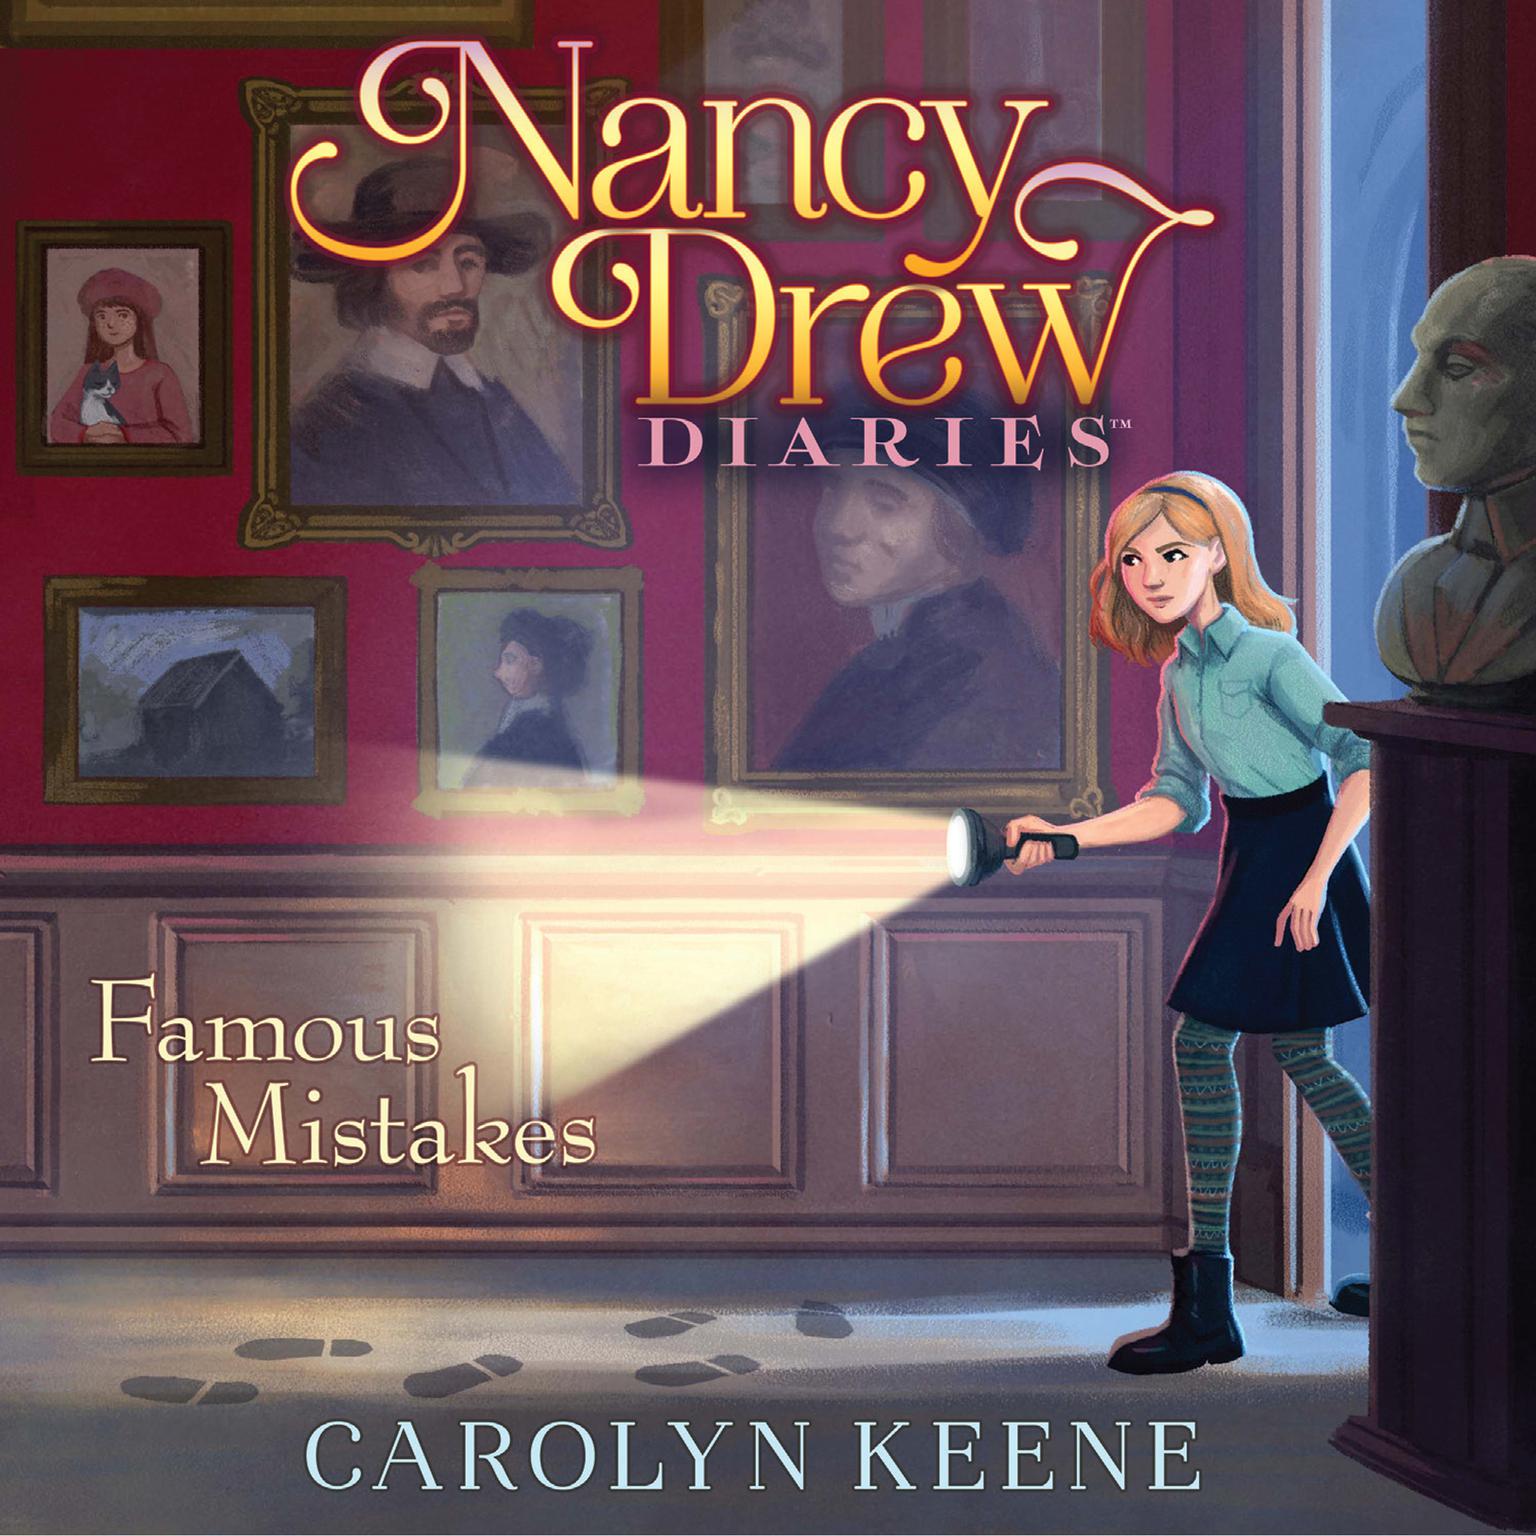 Famous Mistakes Audiobook, by Carolyn Keene